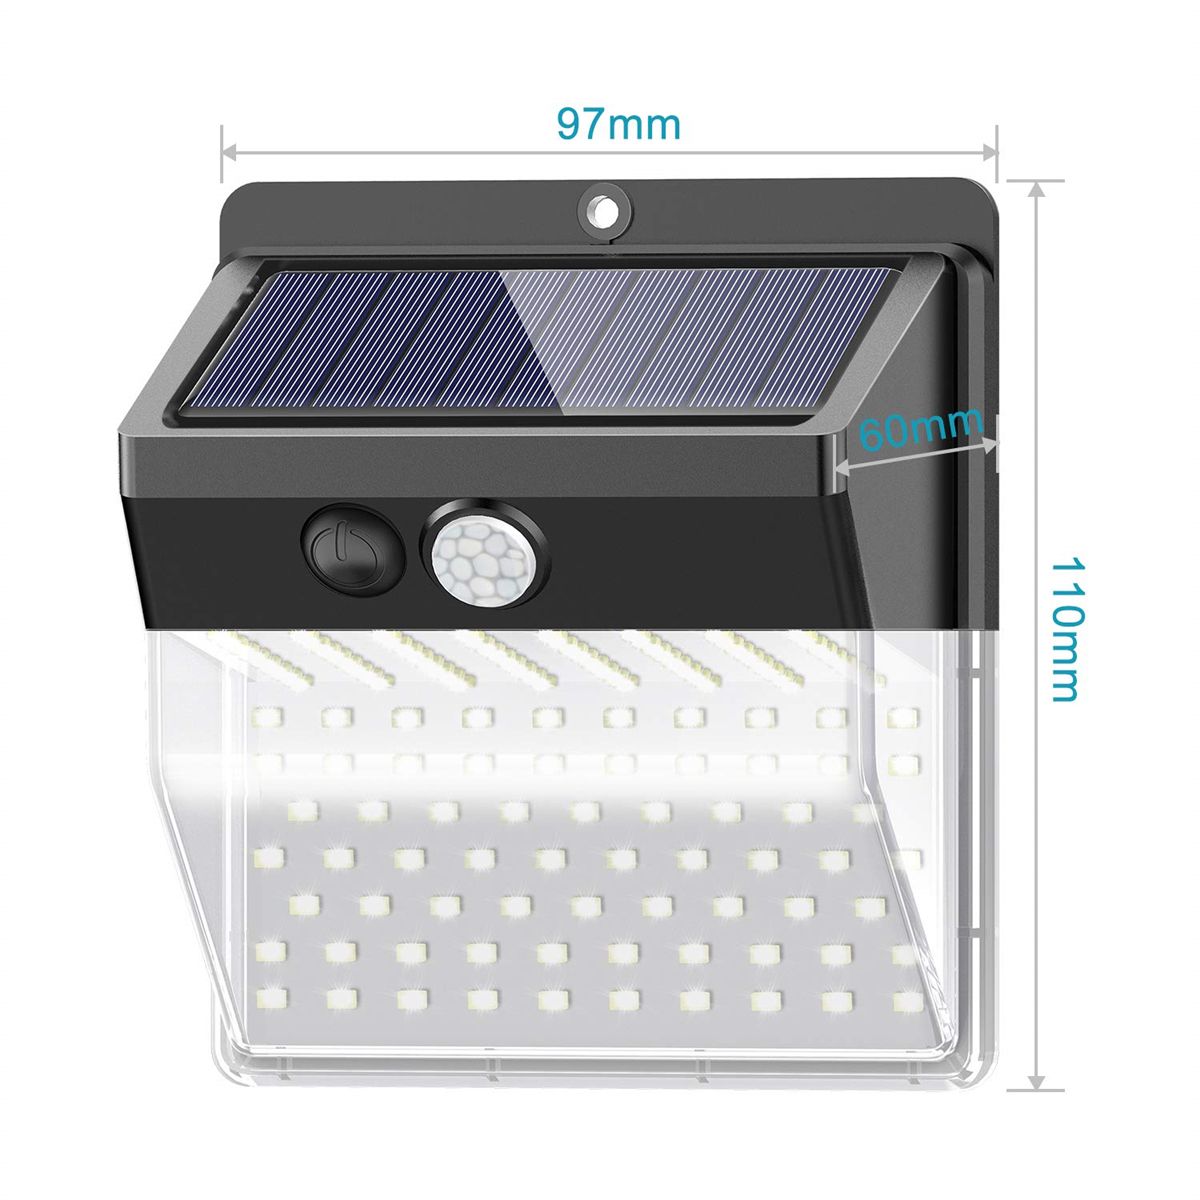 Waterproof-LED-Solar-Light-Body-Induction-Outdoor-Night-Wall-Lamp-for-Garden-Fence-Patio-1680668